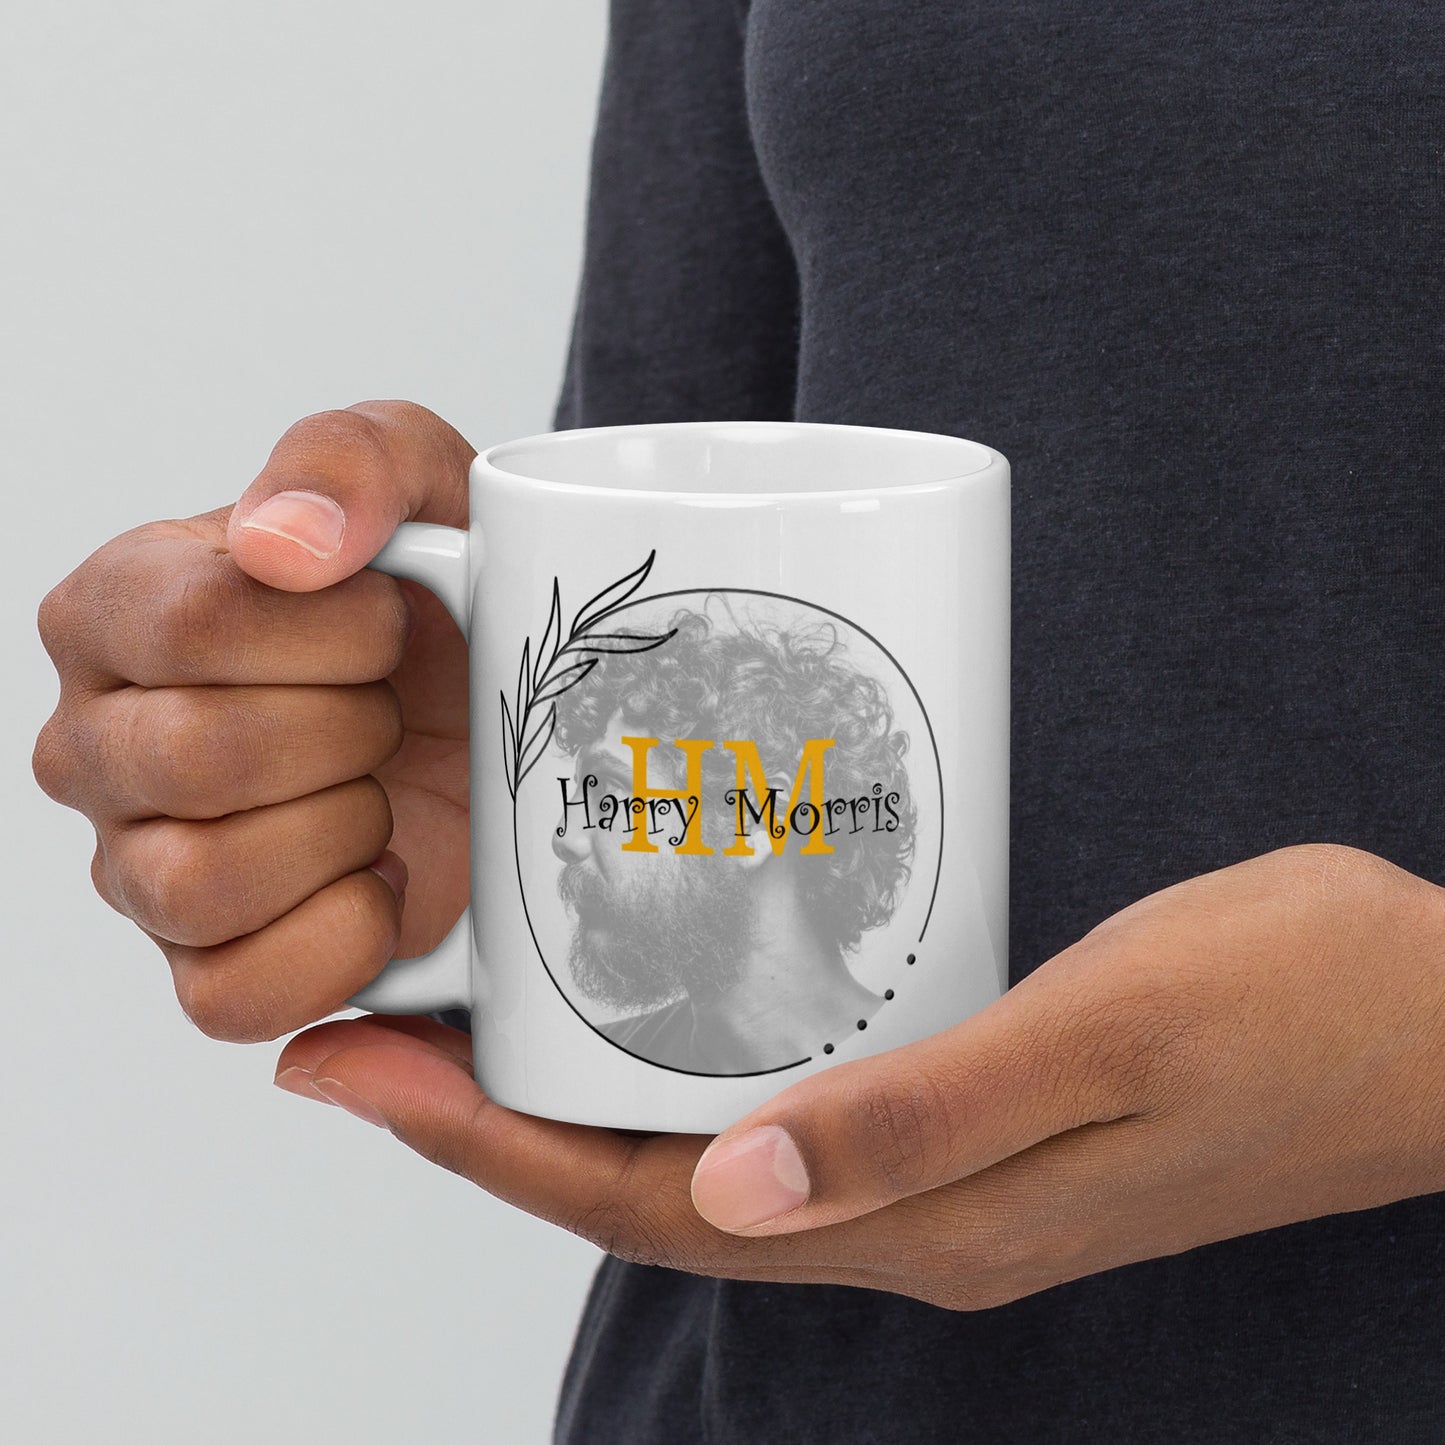 Glossy mug with stylized name and photo engraved on the outer surface image